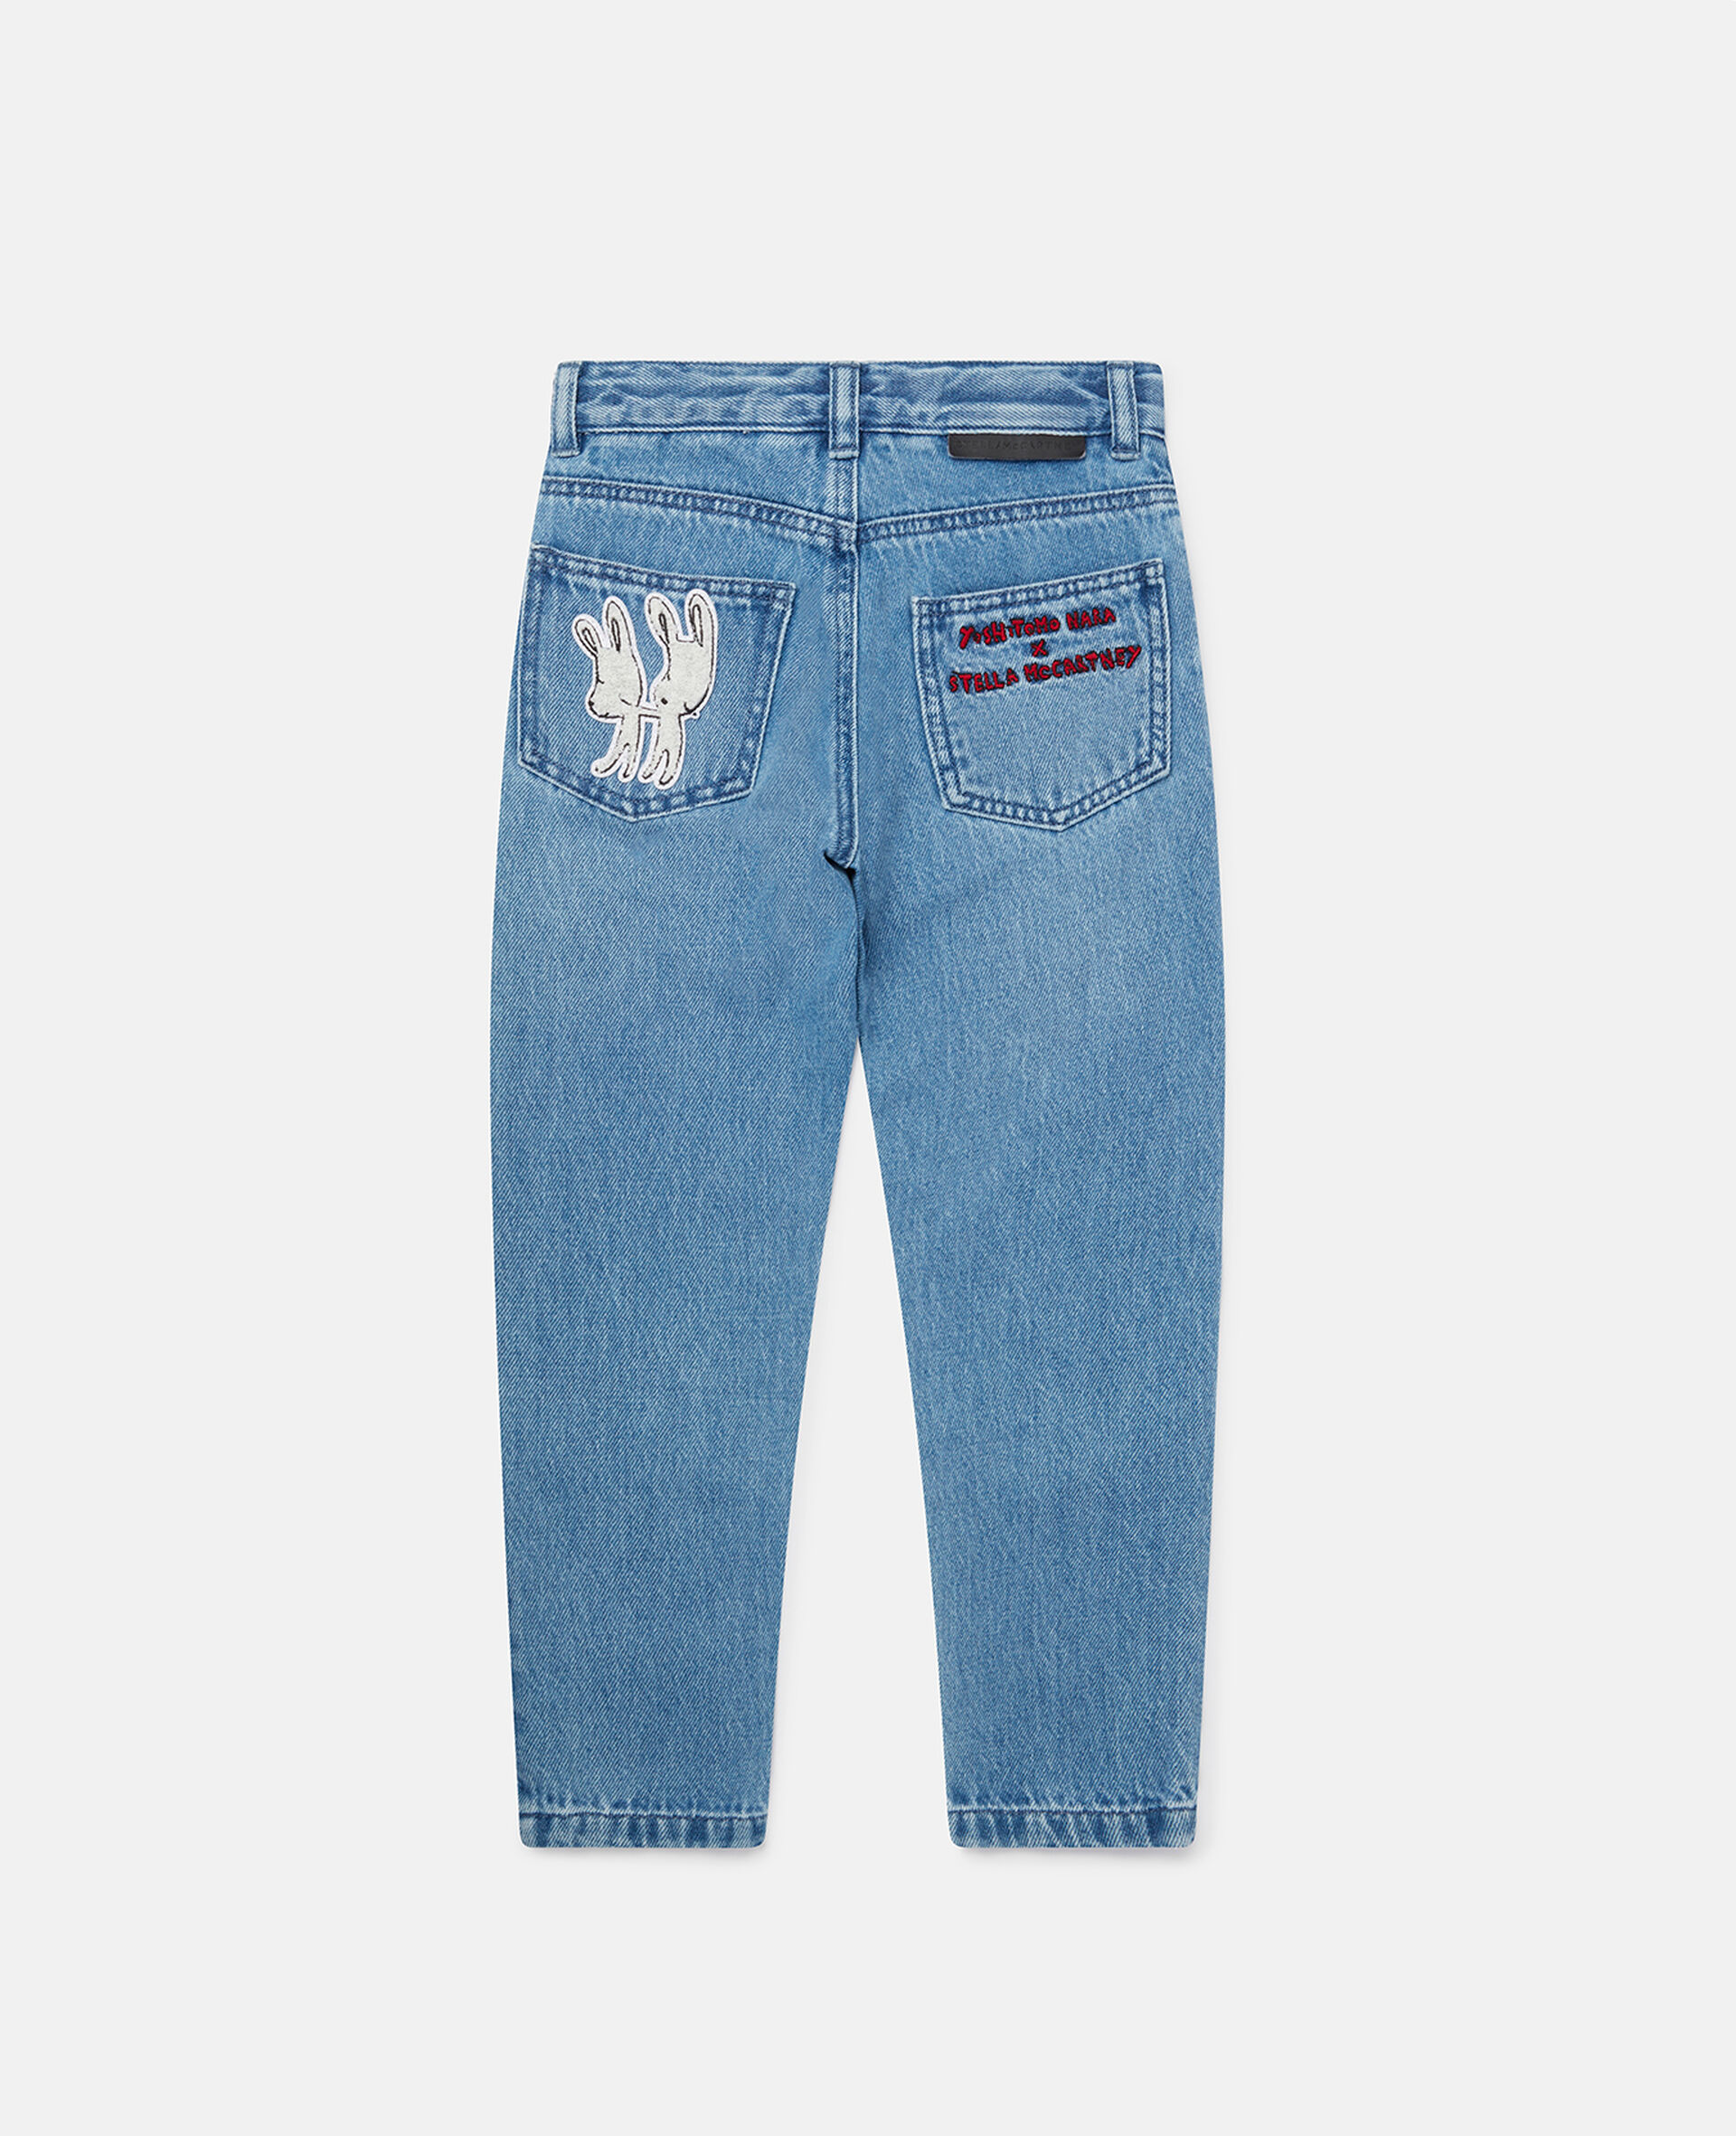 Yoshitomo Nara Patch Embroidery Jeans-Blue-large image number 1